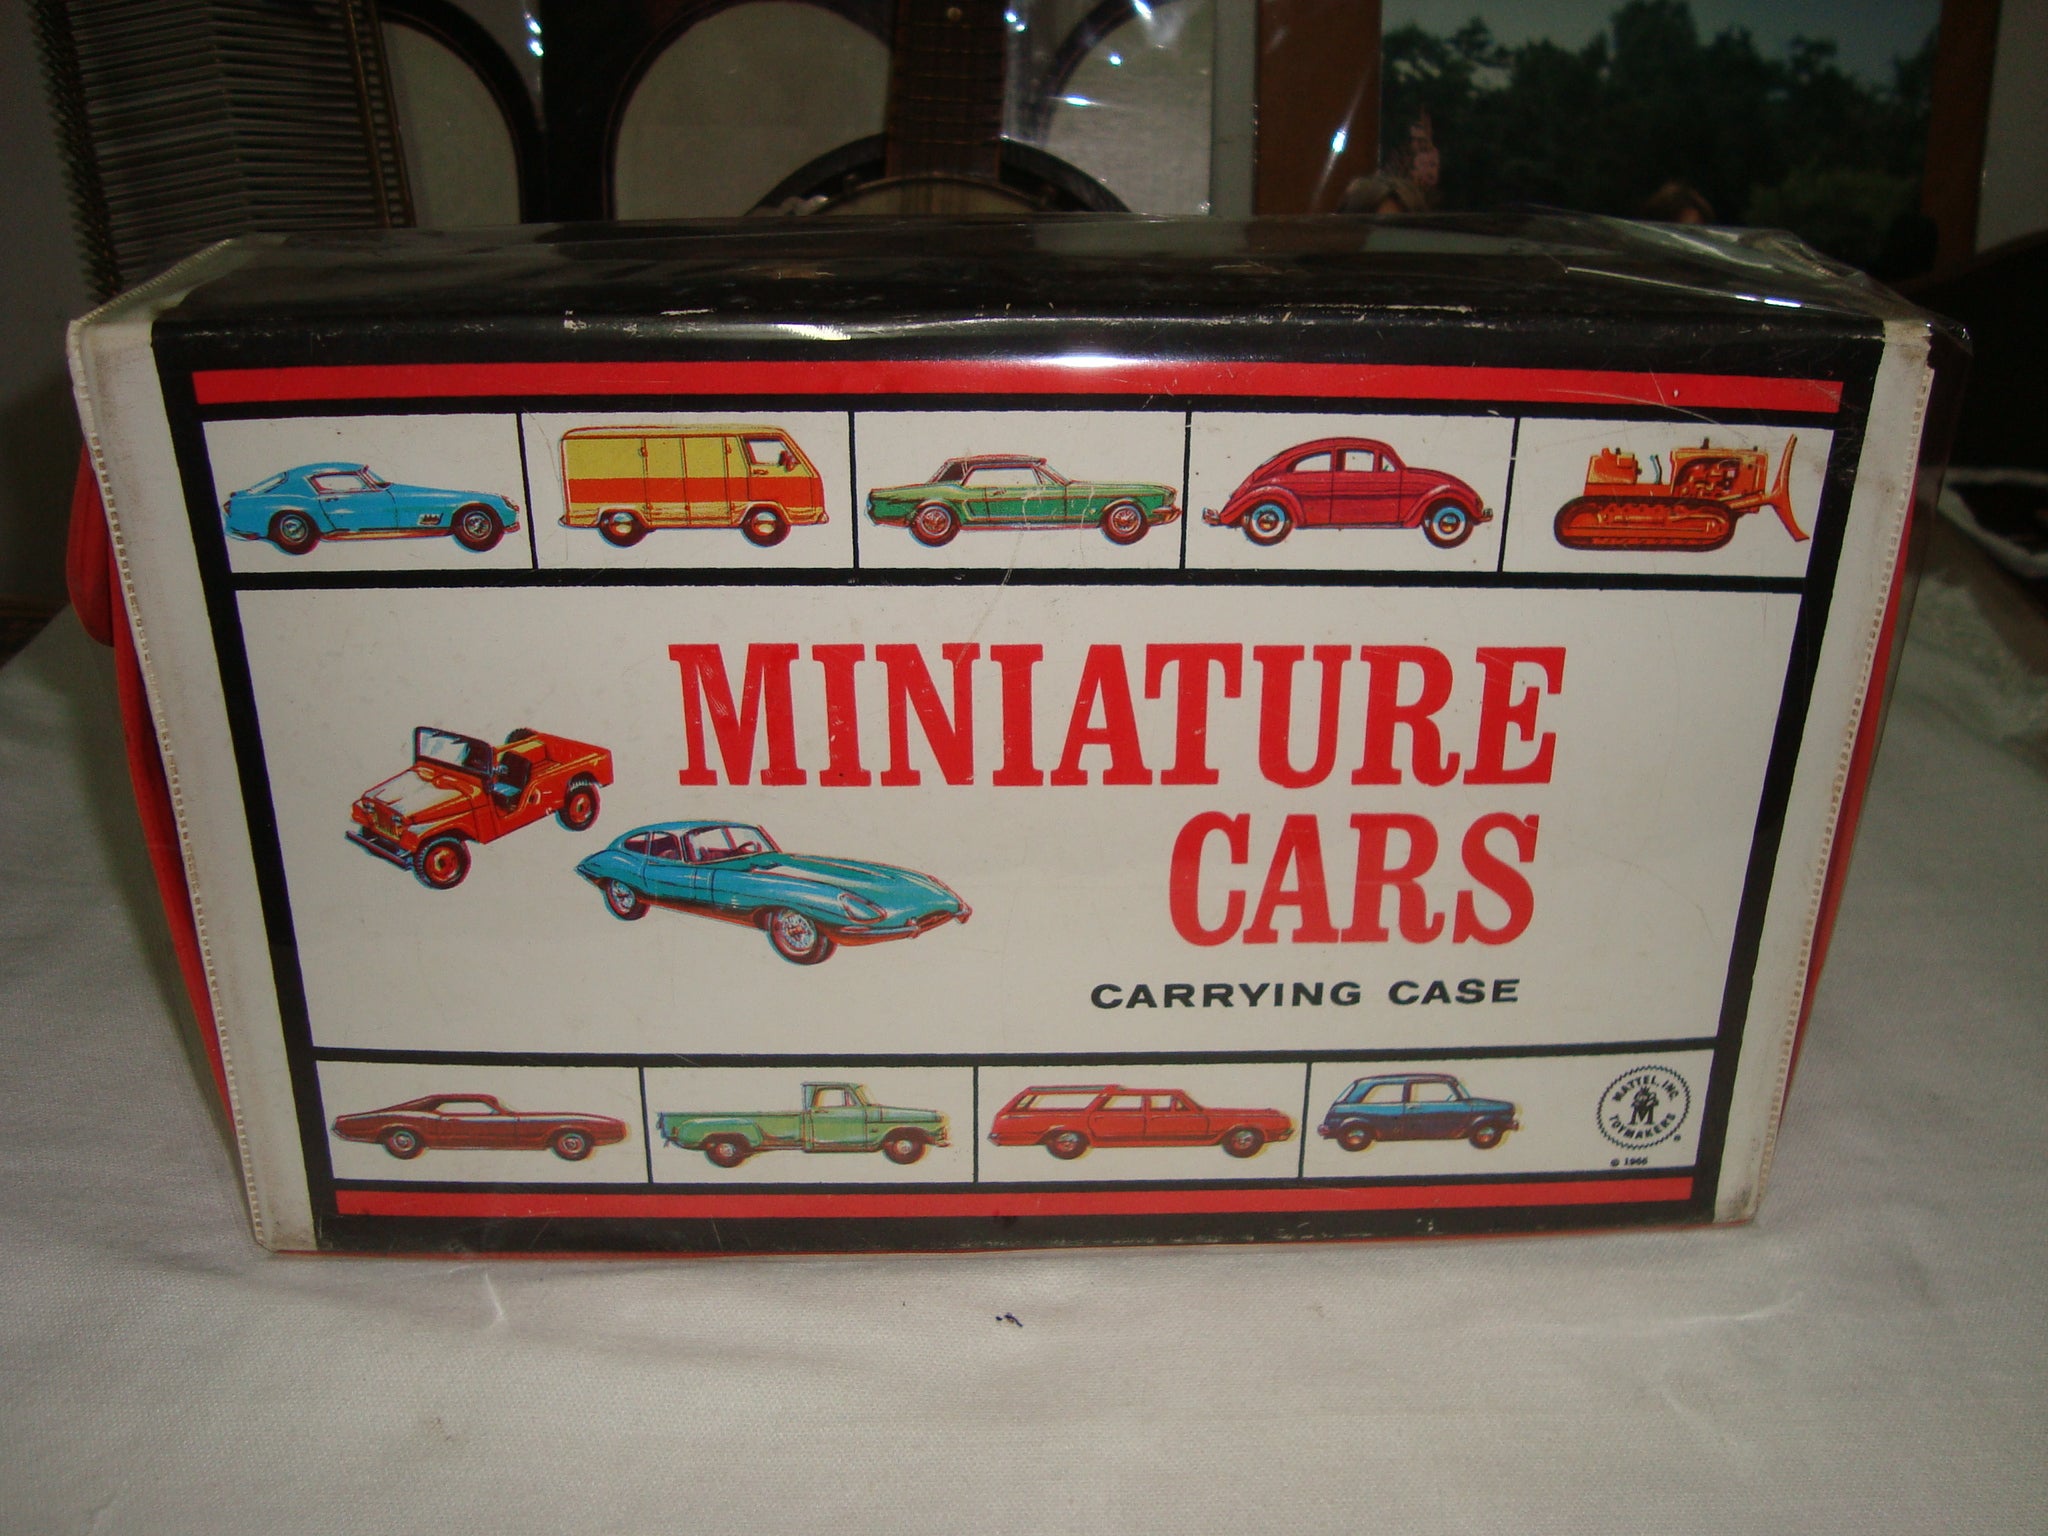 Miniature Cars Carrying Case